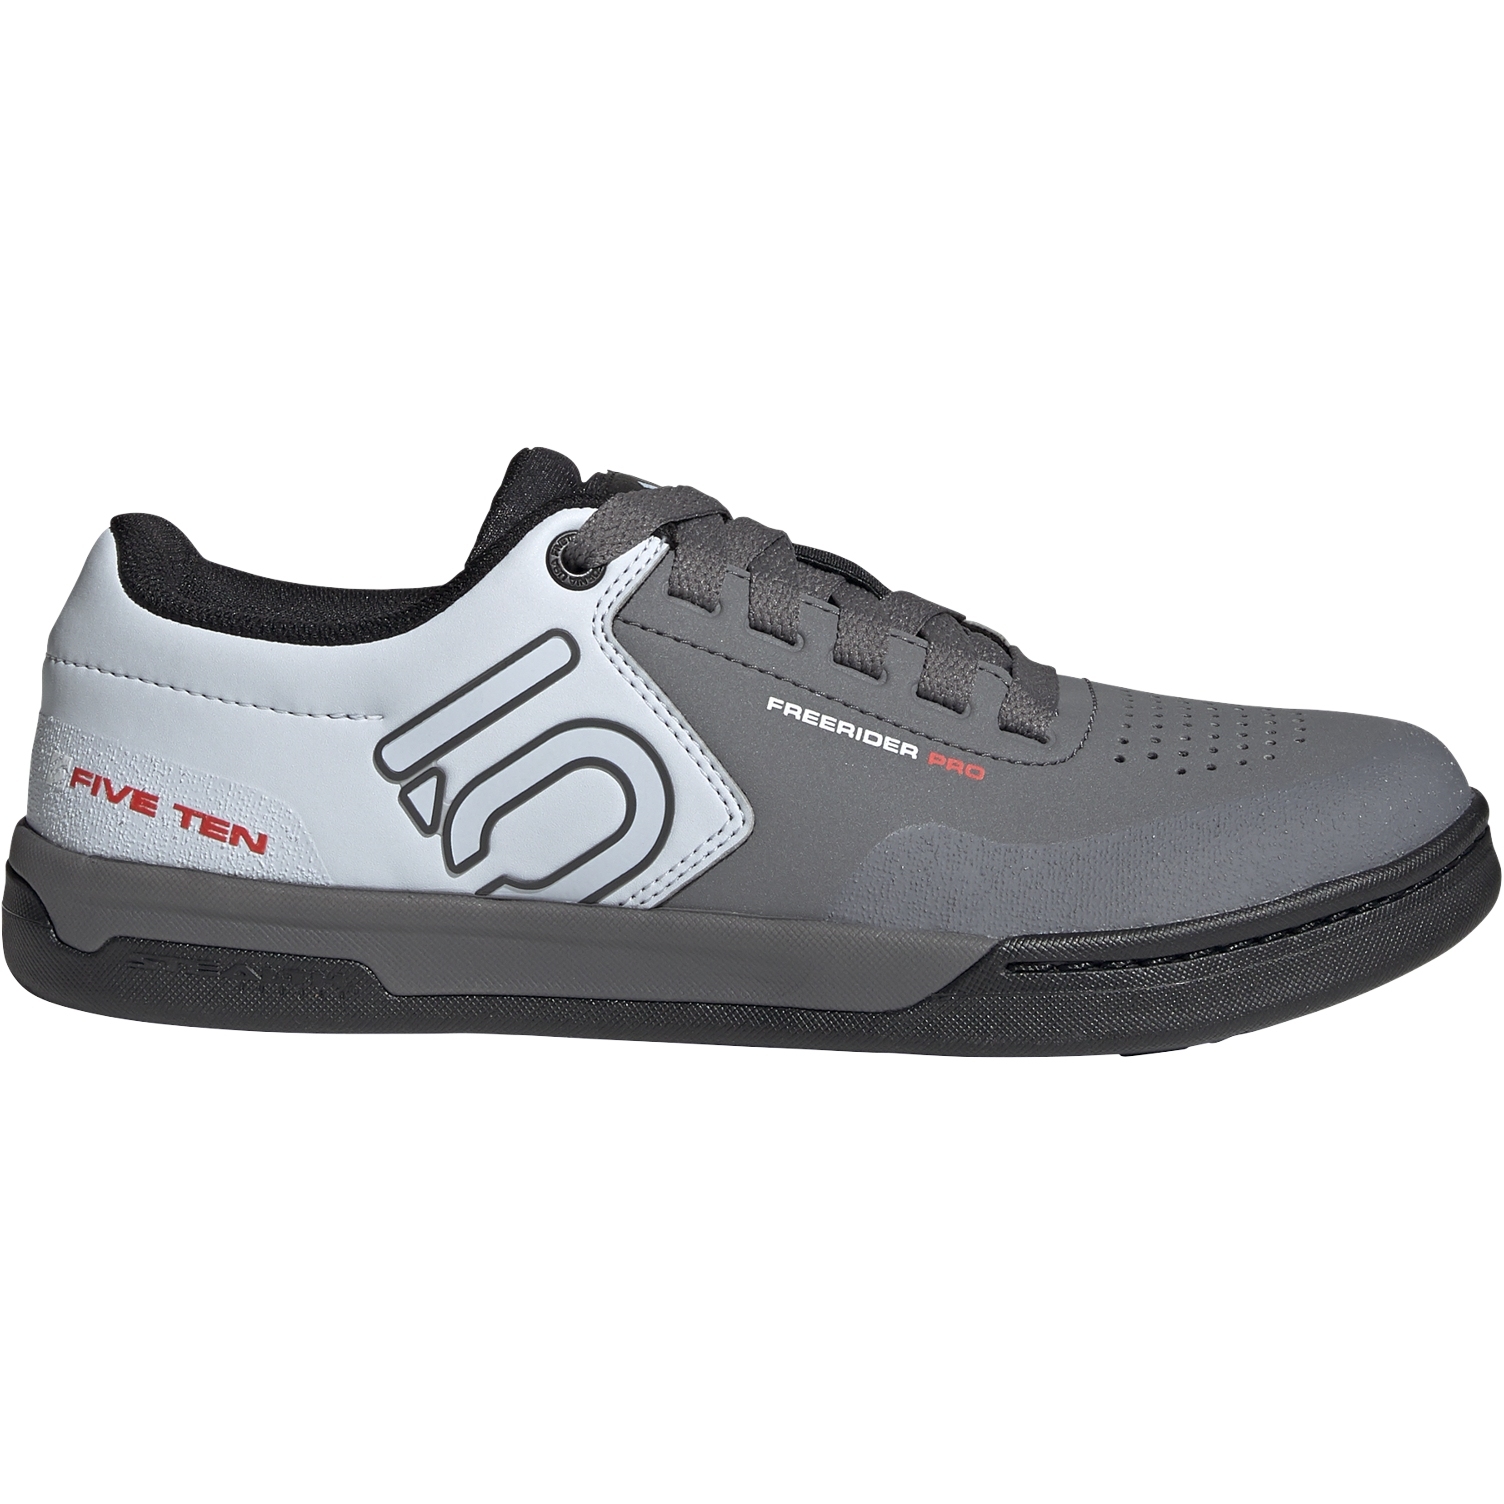 Picture of Five Ten Freerider Pro Mountain Bike Shoes - Grey Five / Cloud White / Halo Blue